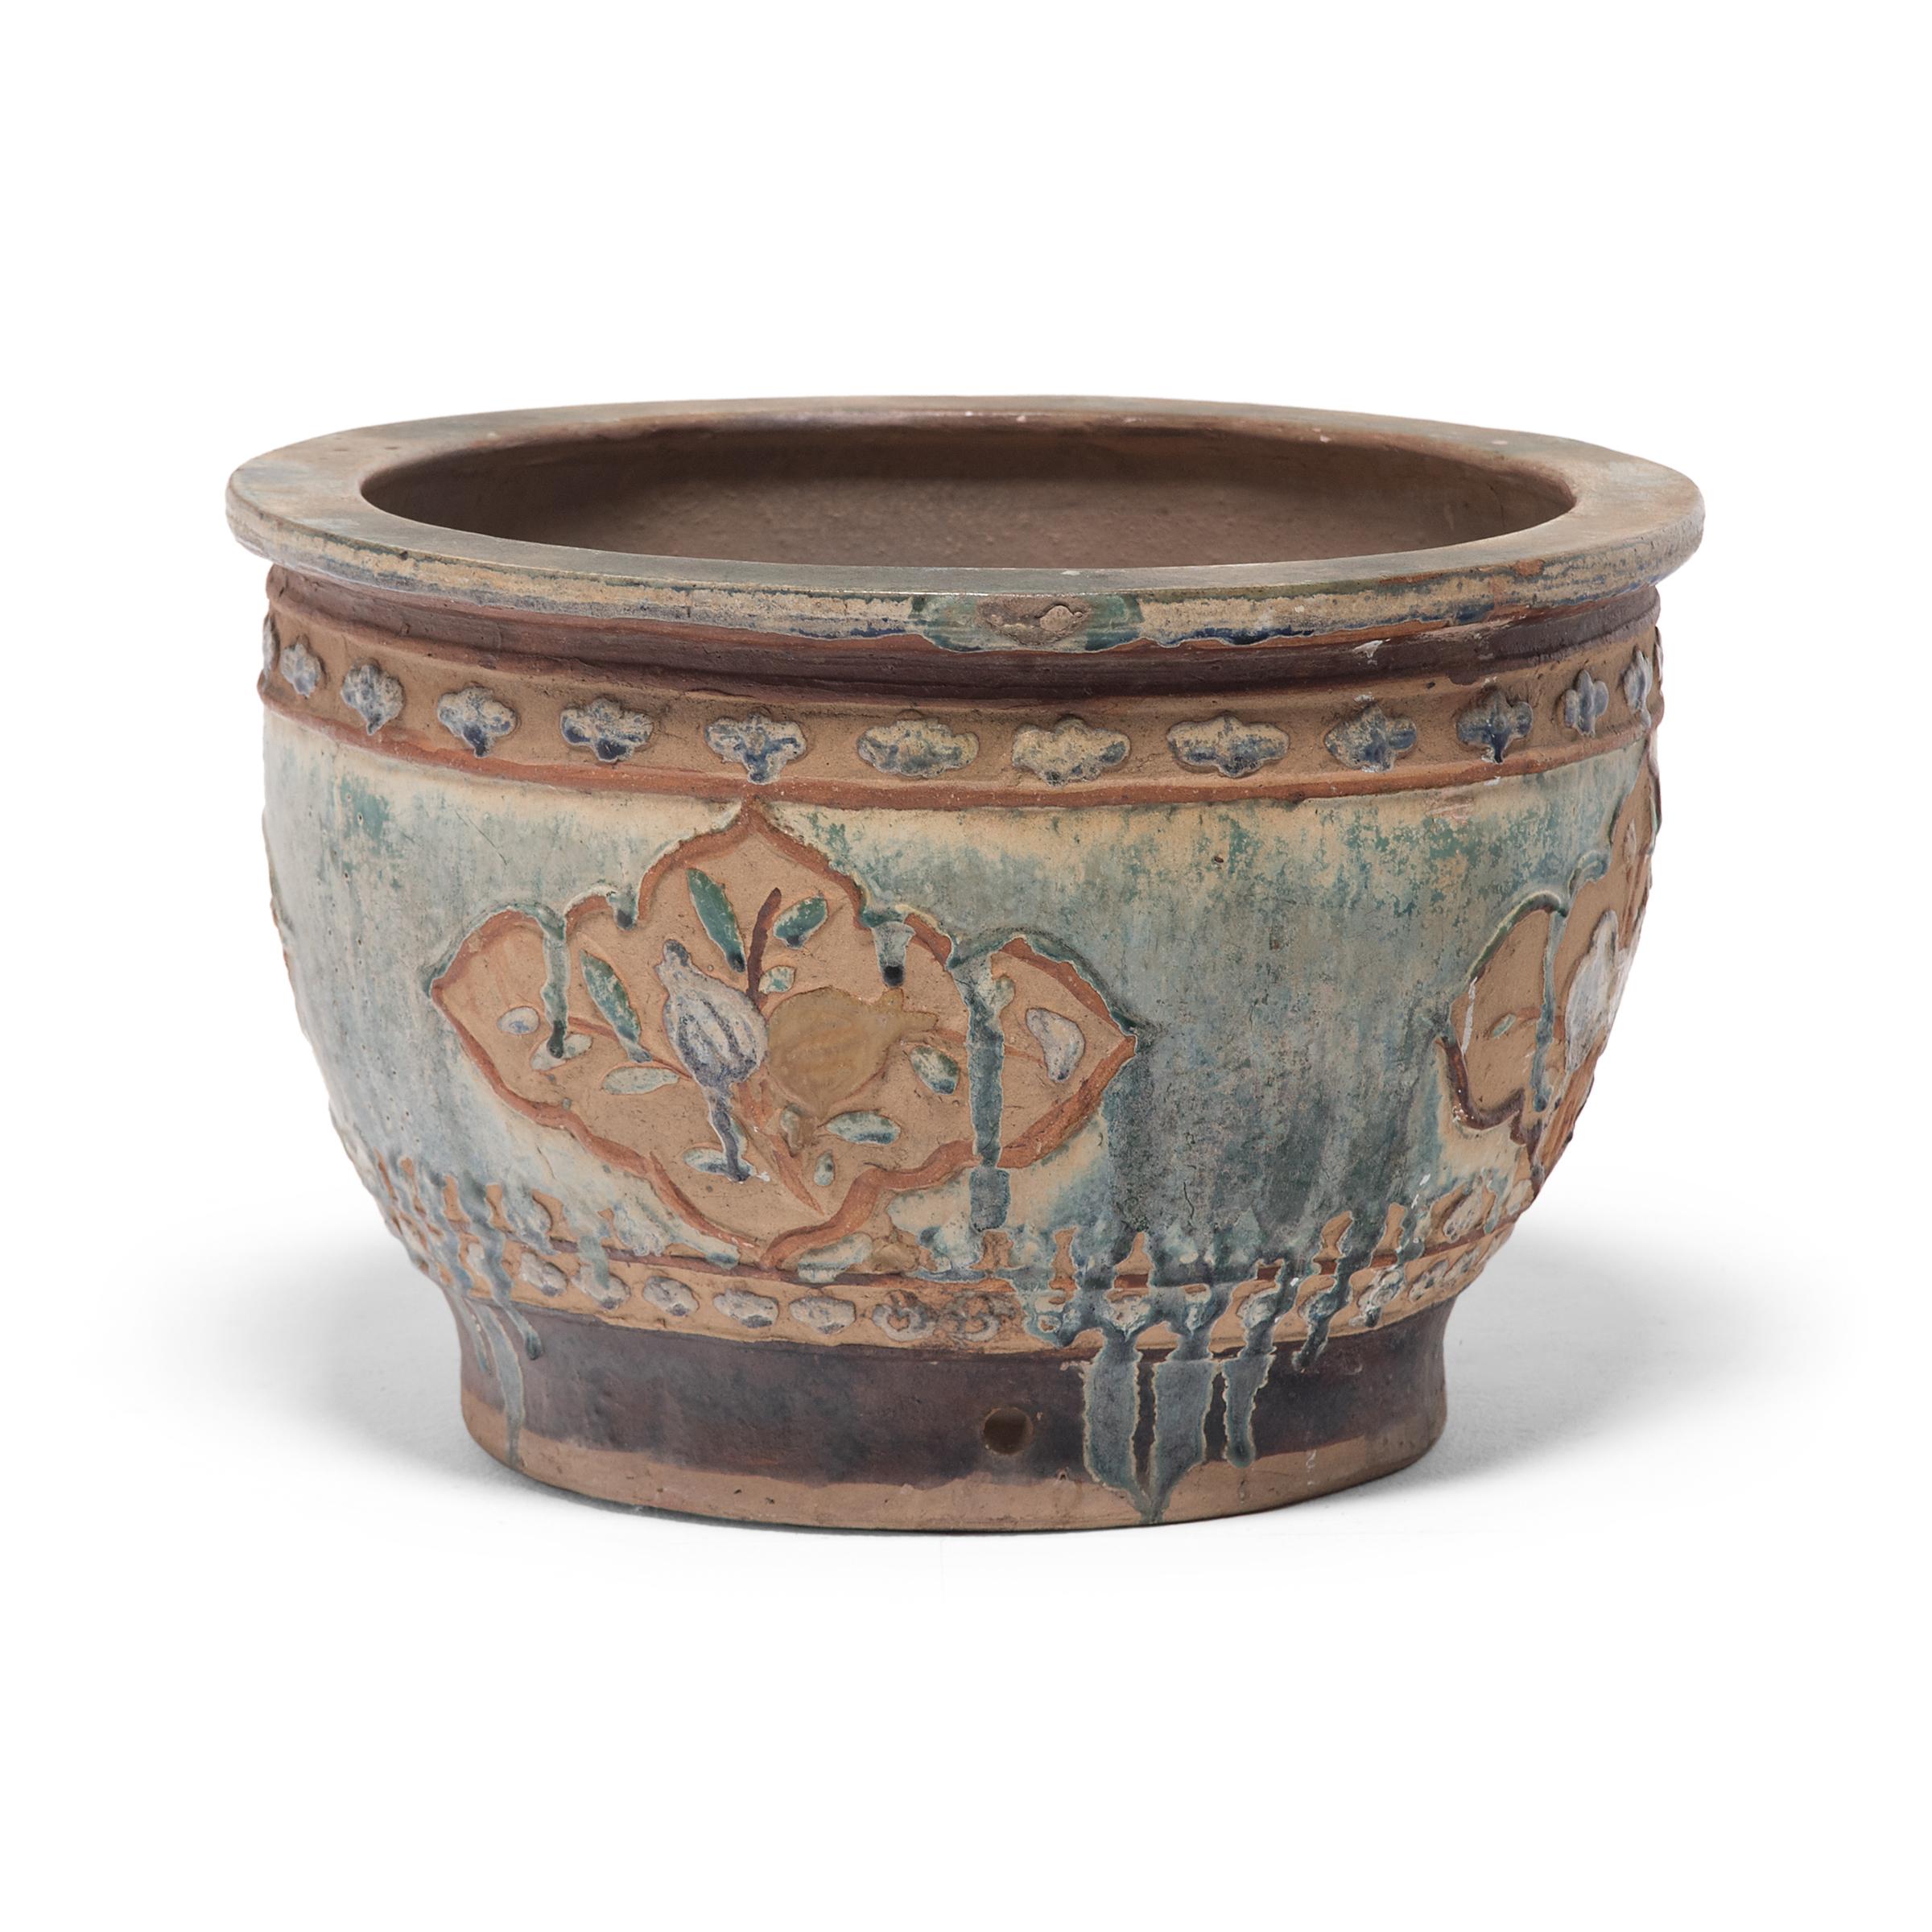 Rustic Chinese Drip Glaze Relief Planter, c. 1930 For Sale